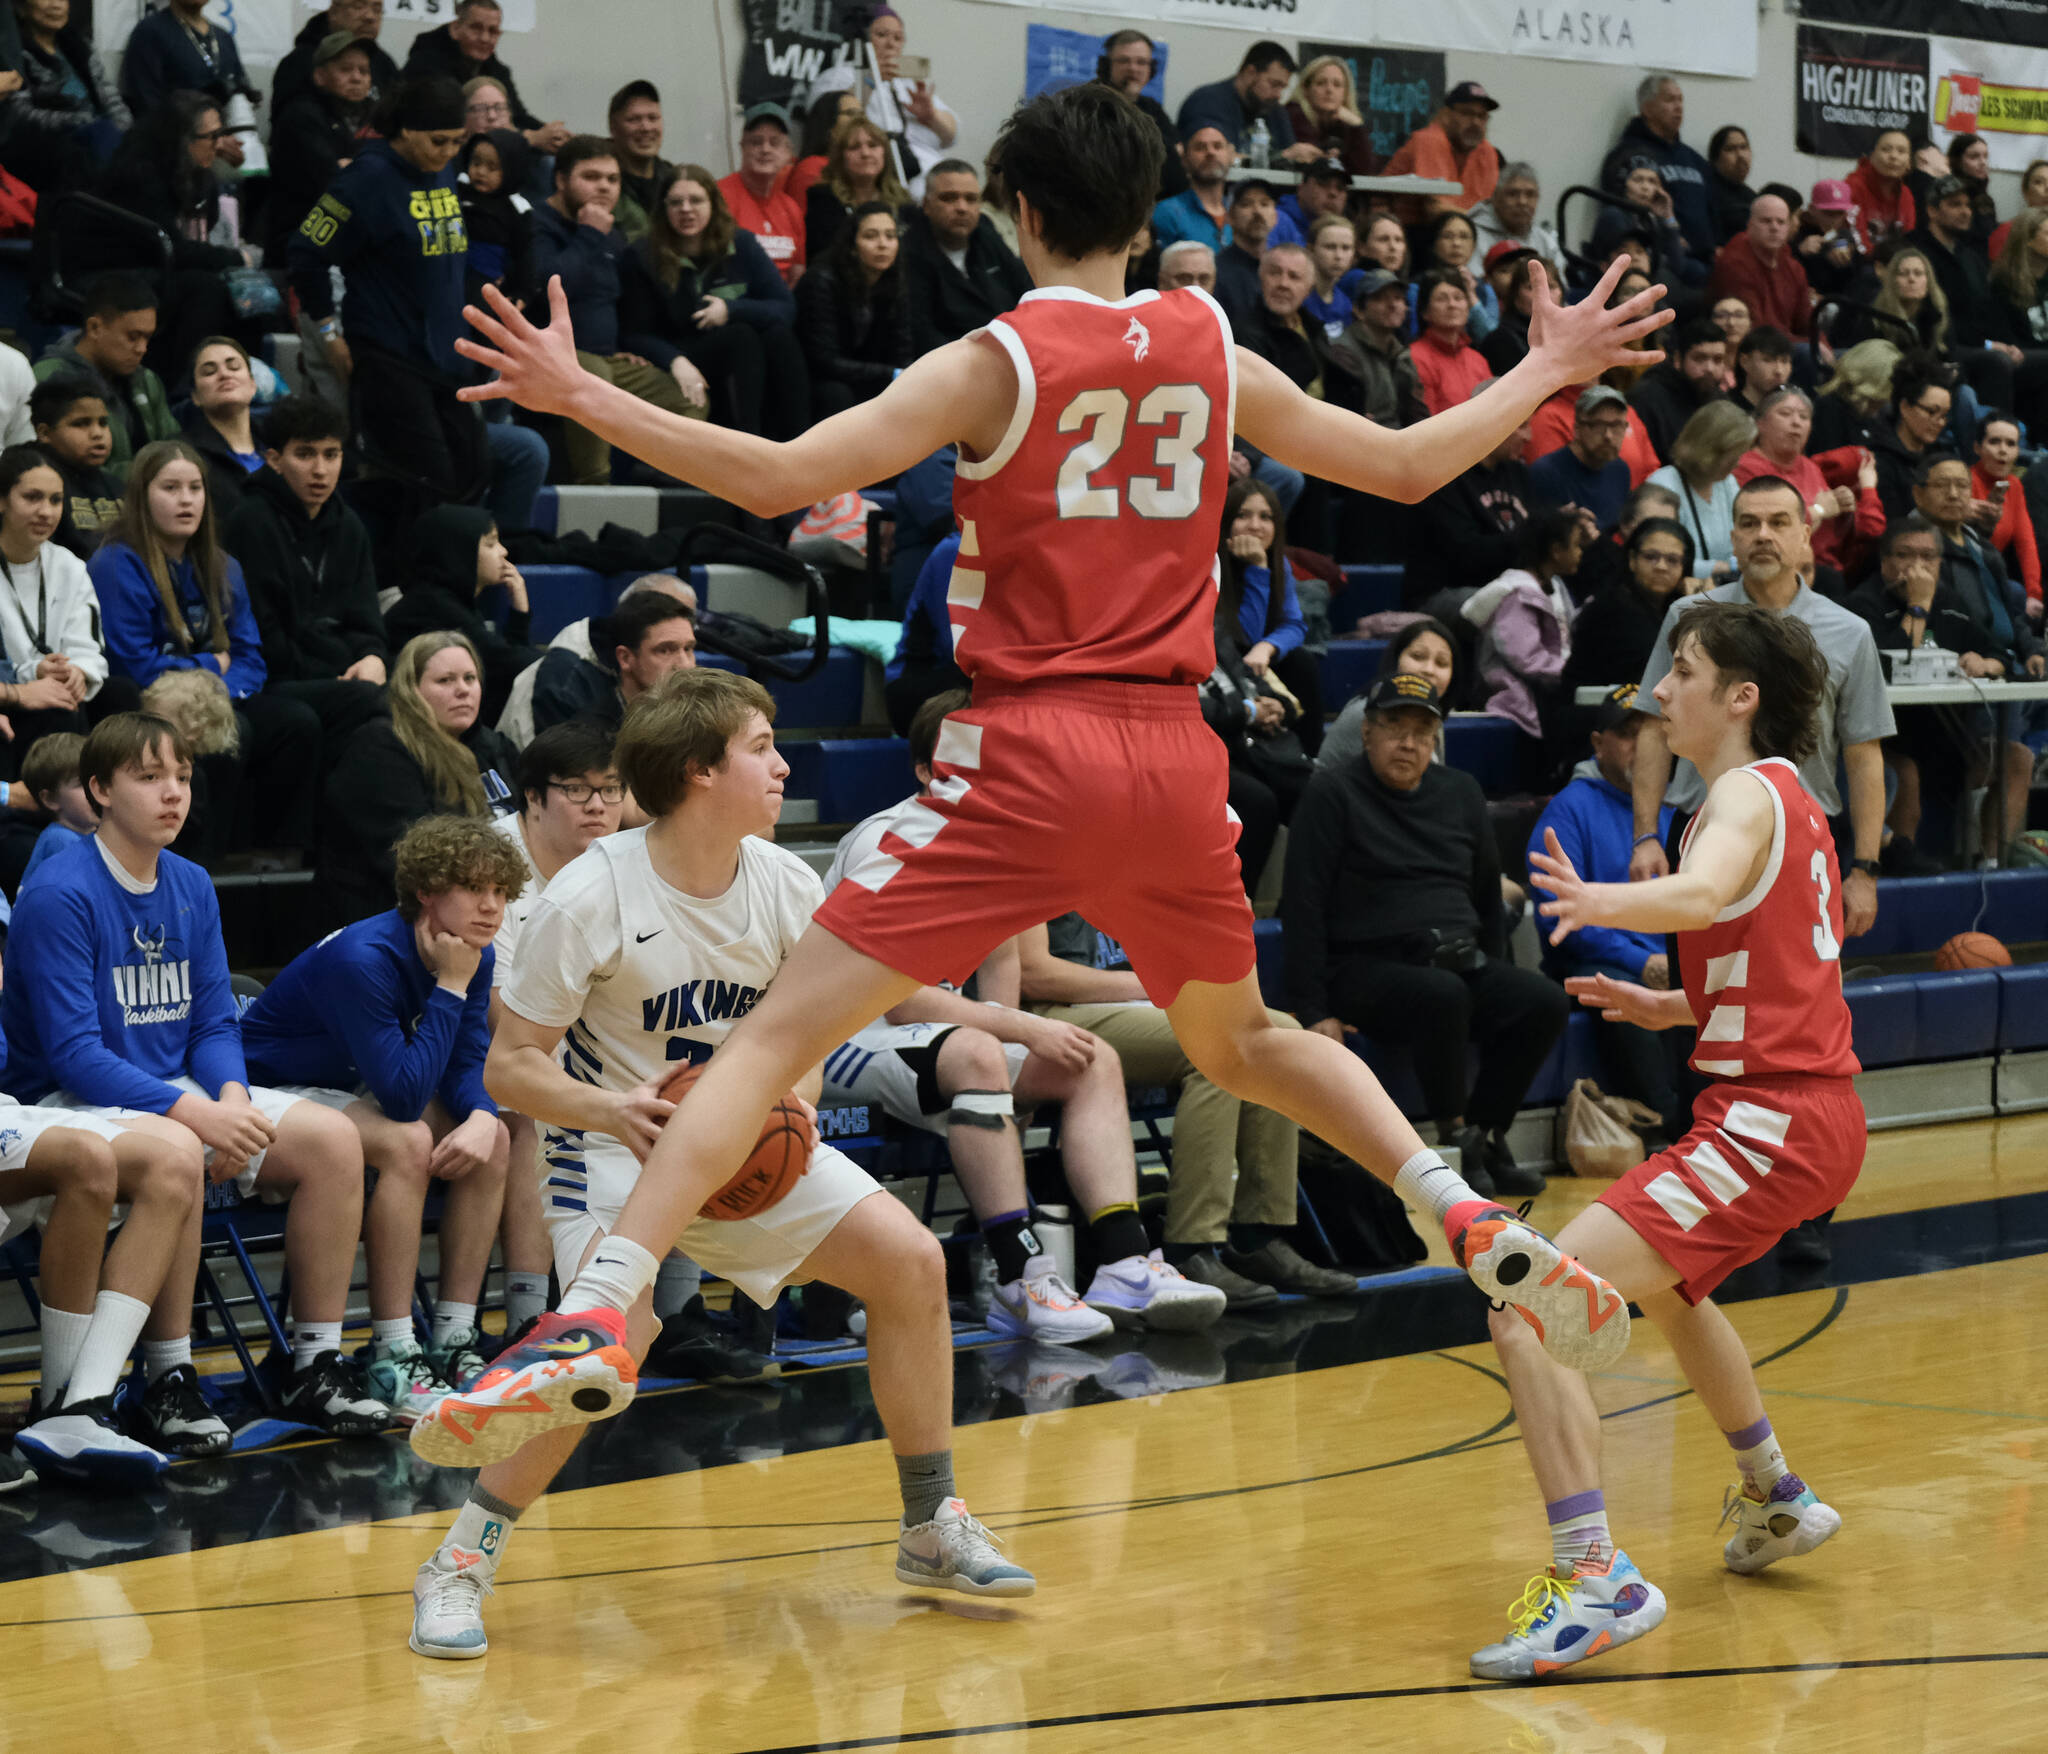 Wrangell seniors Jacen Hay (23) and Devlyn Campbell (3) defend Petersburg senior Owen Anderson during the Wolves 45-41 win over the Vikings in the 2A Region V Runner Up game on Saturday at Juneau’s Thunder Mountain High School. (Klas Stolpe / For Juneau Empire)